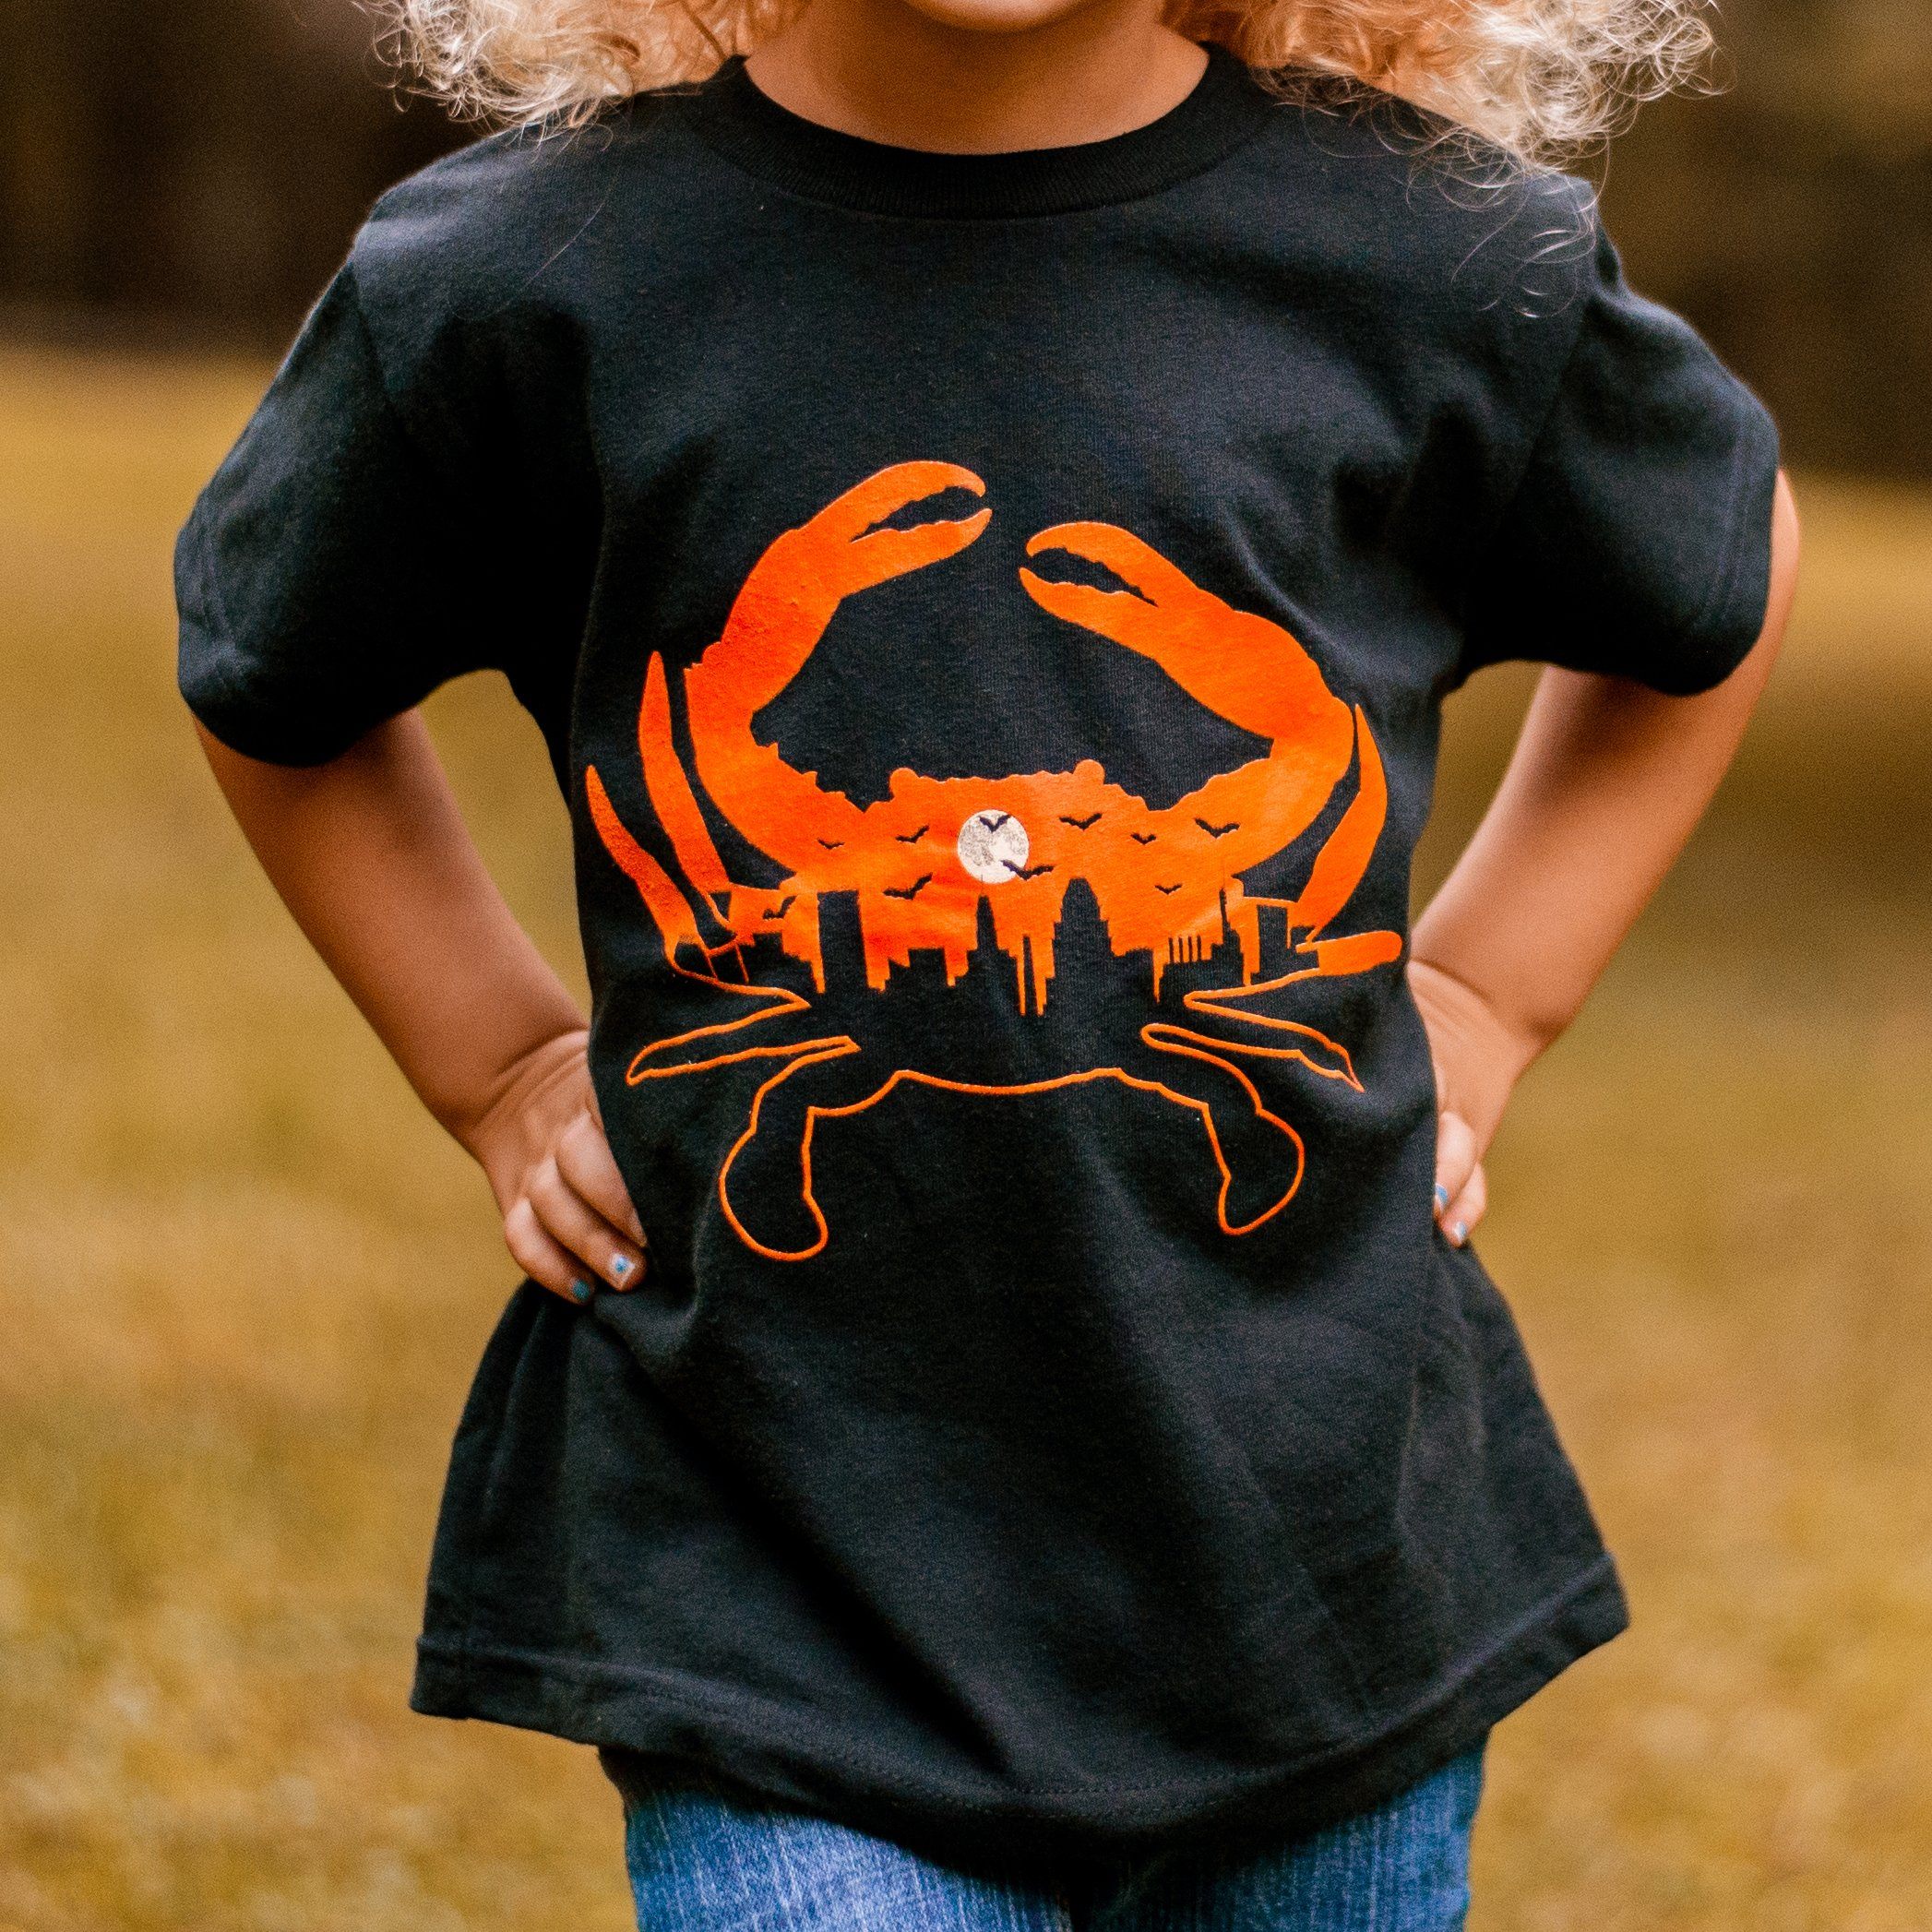 Spooky Skyline Crab (Black) / *Toddler* Shirt - Route One Apparel